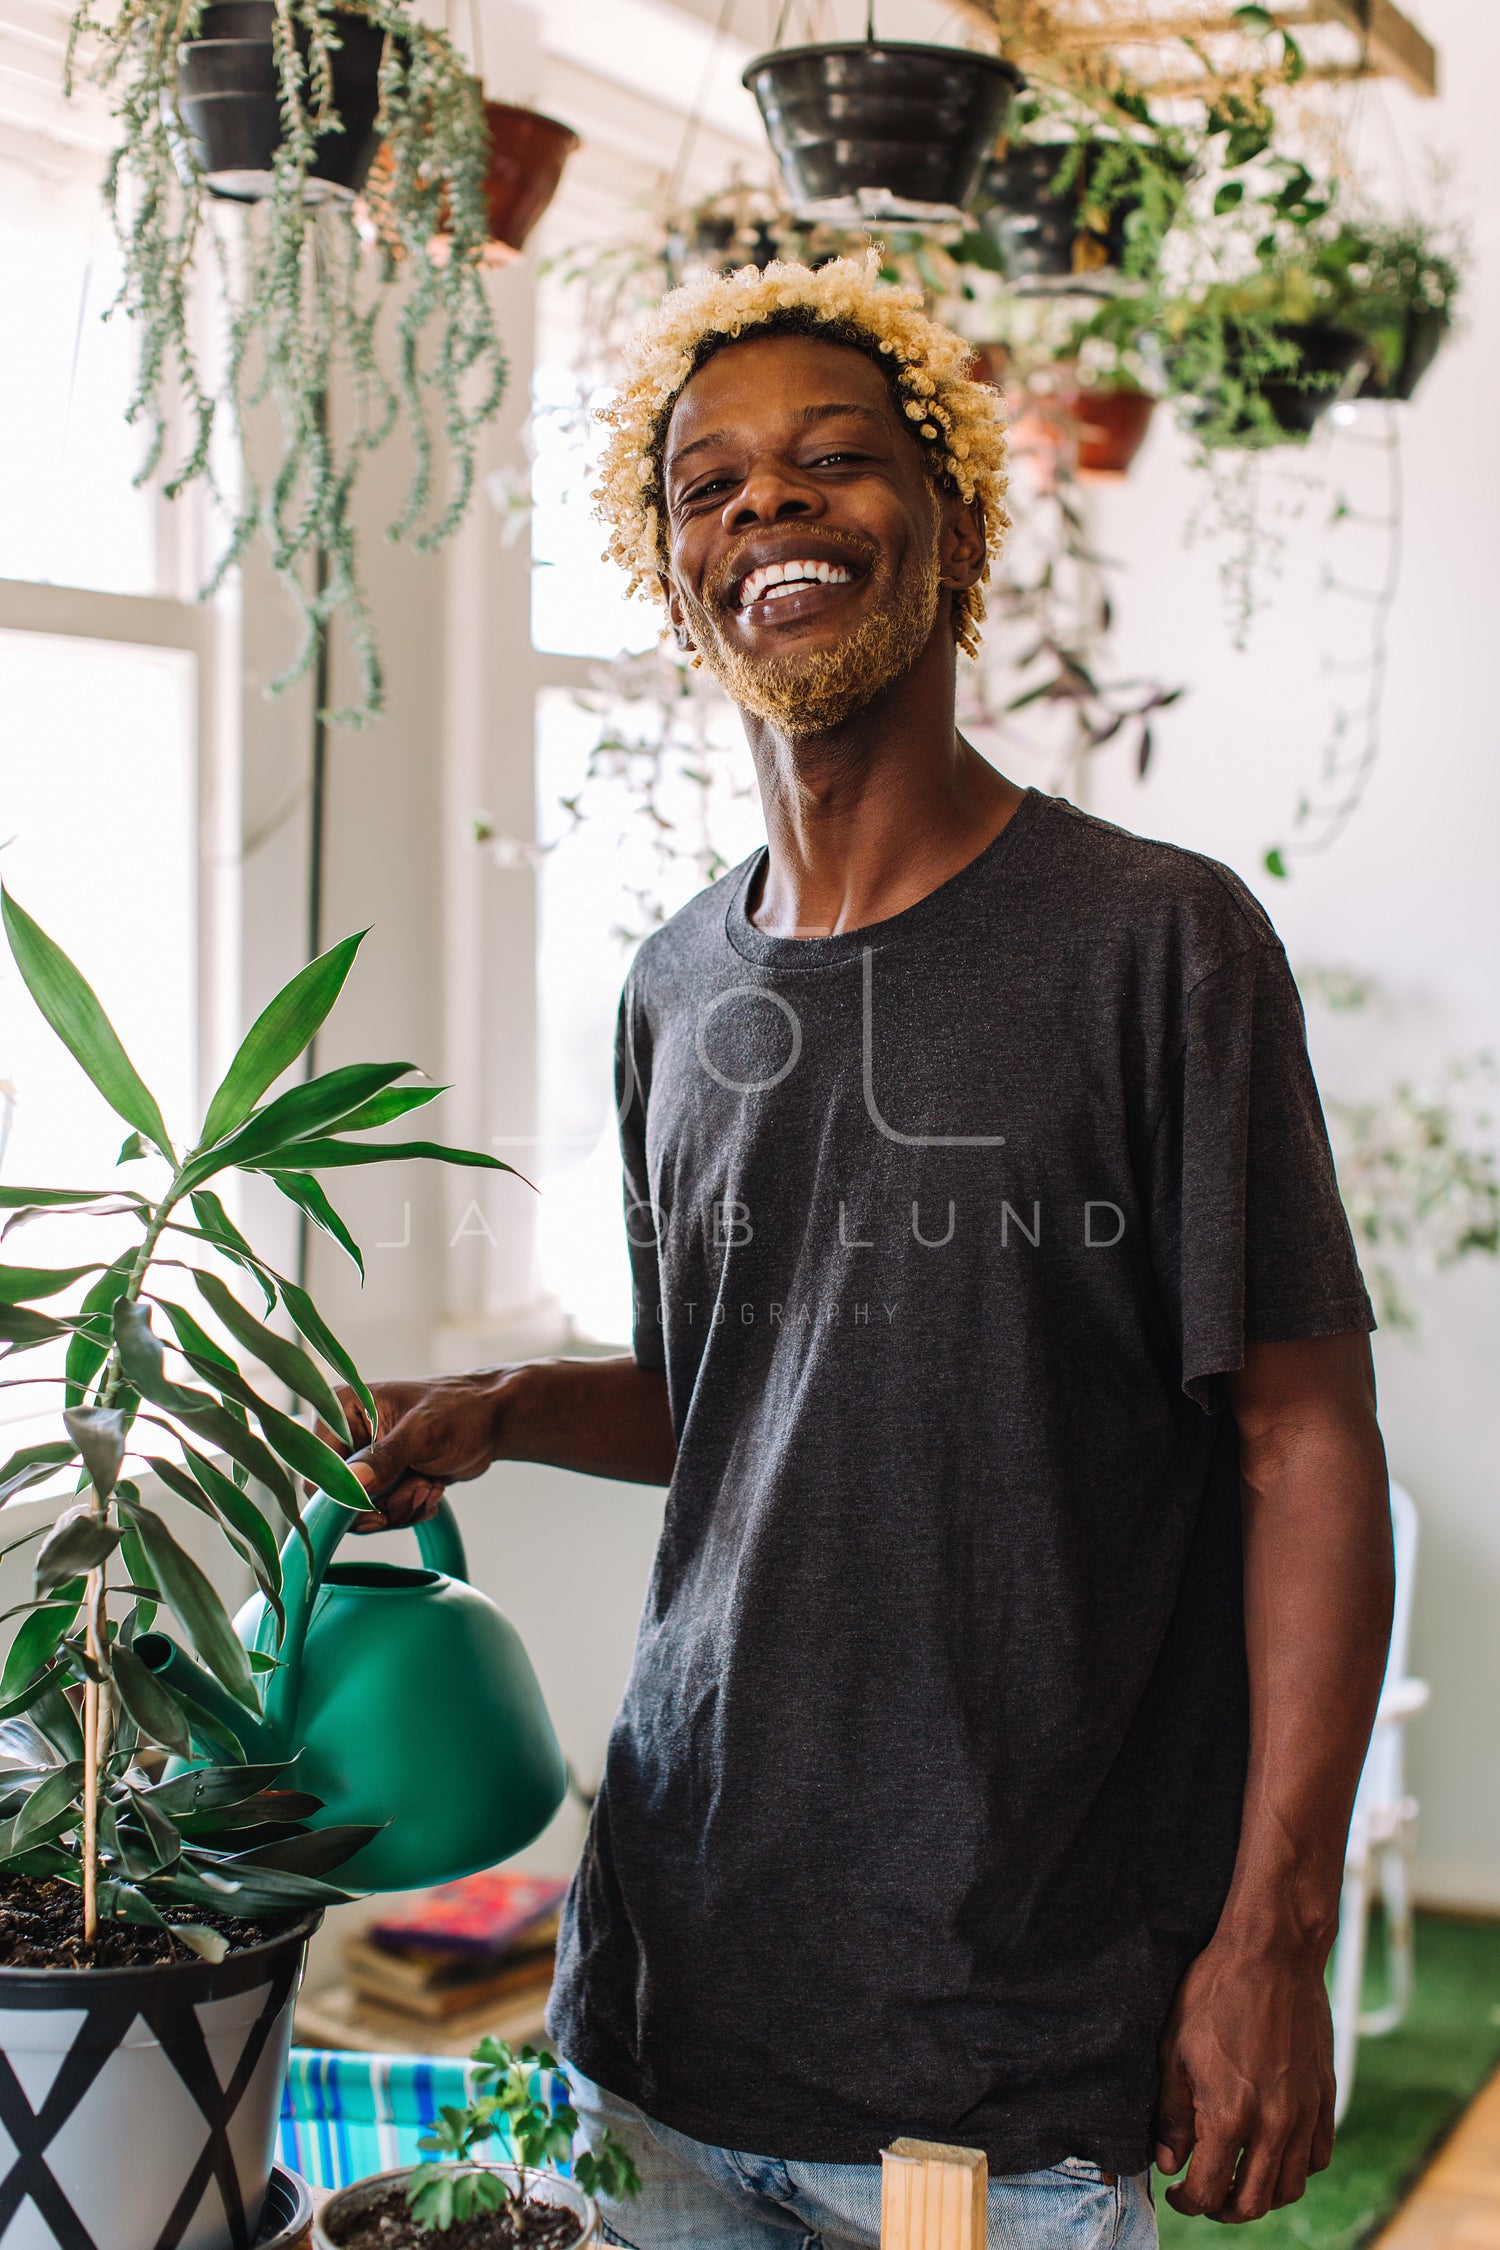 Smiling black man watering a flower pot at home – Jacob Lund